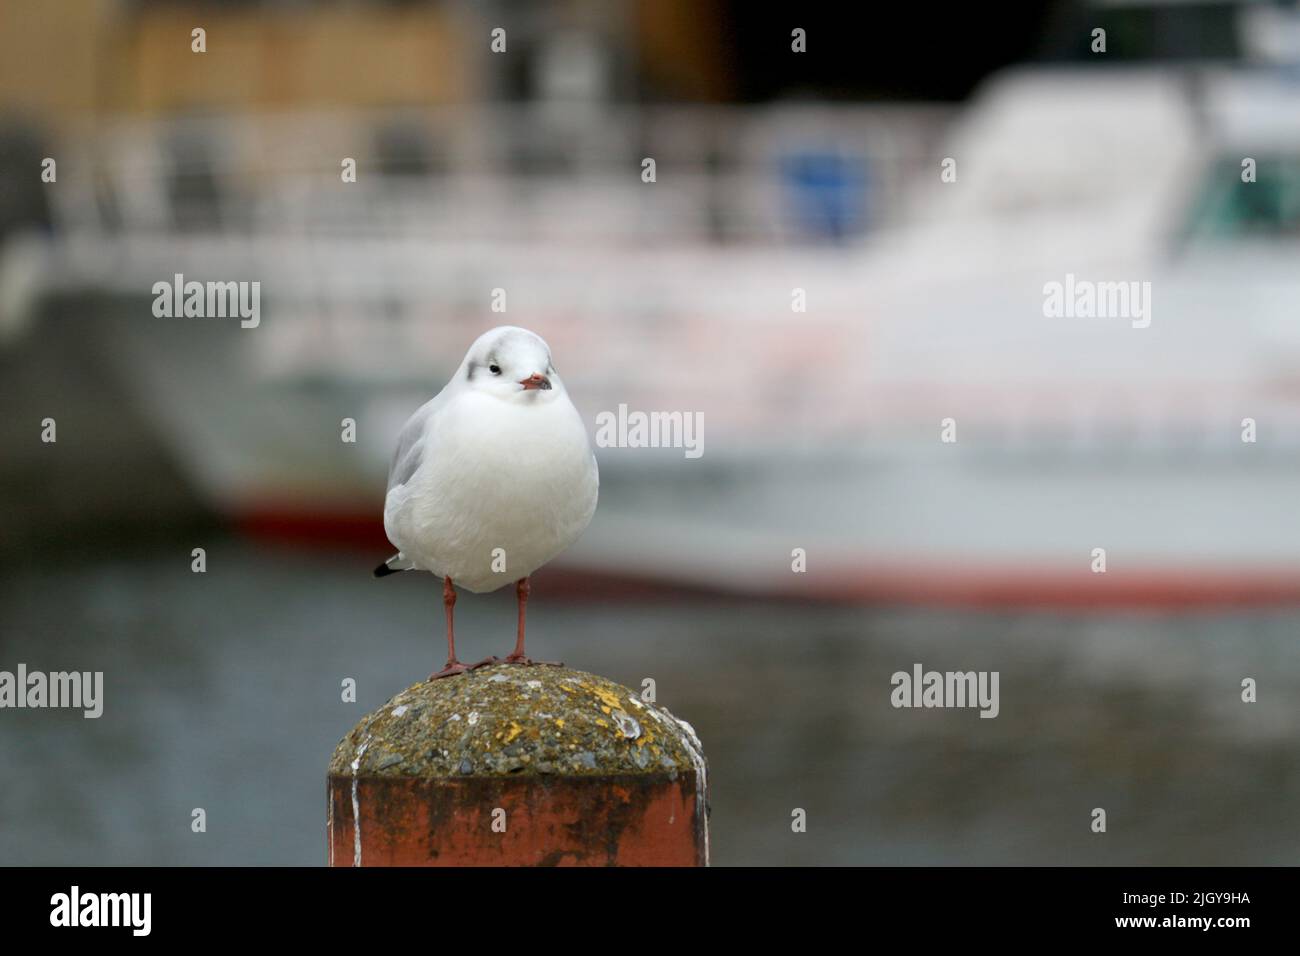 A seagull that is about to fall asleep on a mooring pillar at the wharf Stock Photo